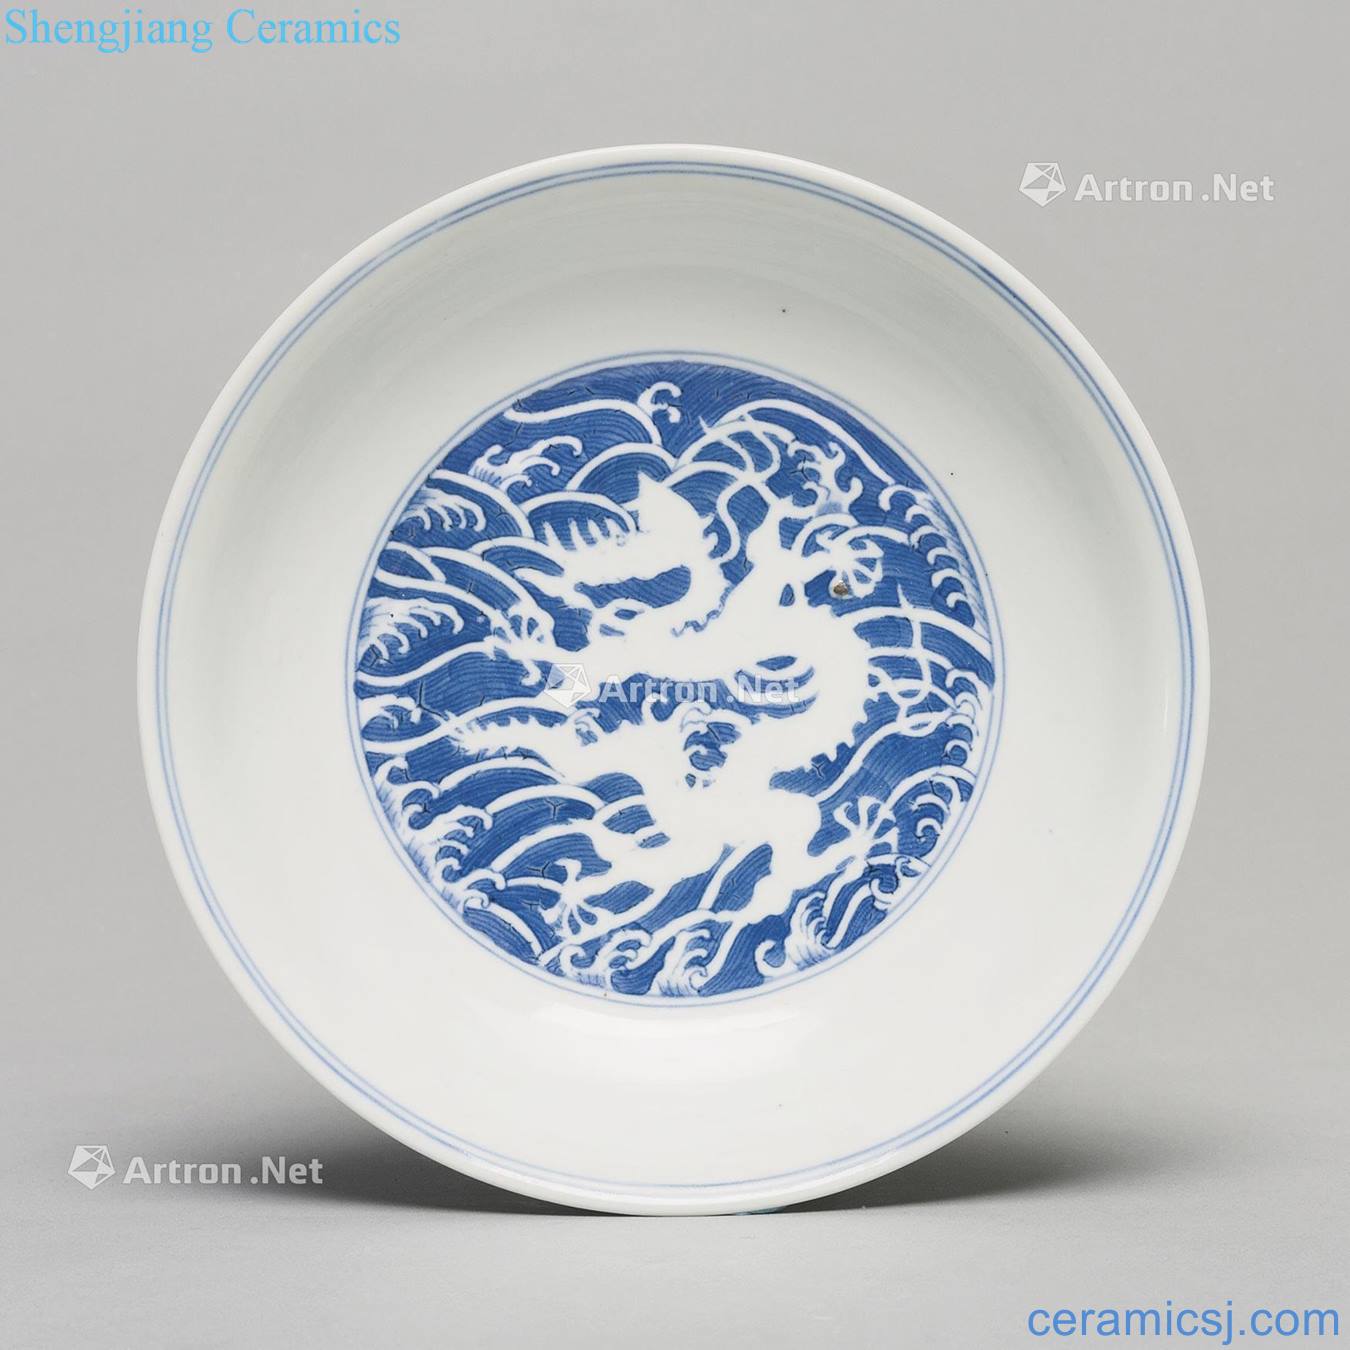 Qing daoguang Blue and white to stay white sea dragon pattern plate